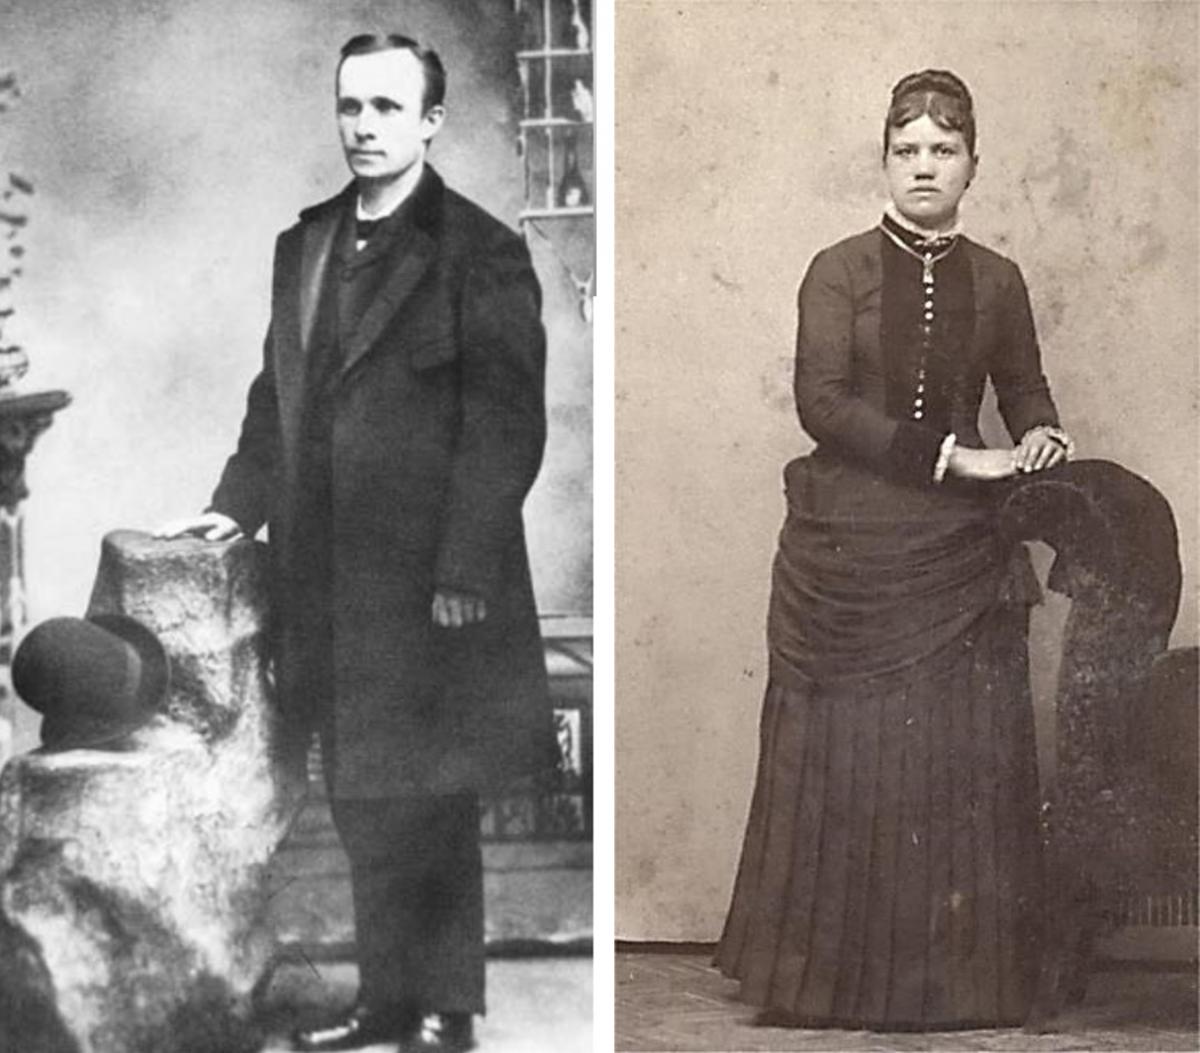 Side by side images. On the left, Andrew Clemens stands in a black and white photo. On the right, a woman in her twenties appears in a sepia-toned photograph.